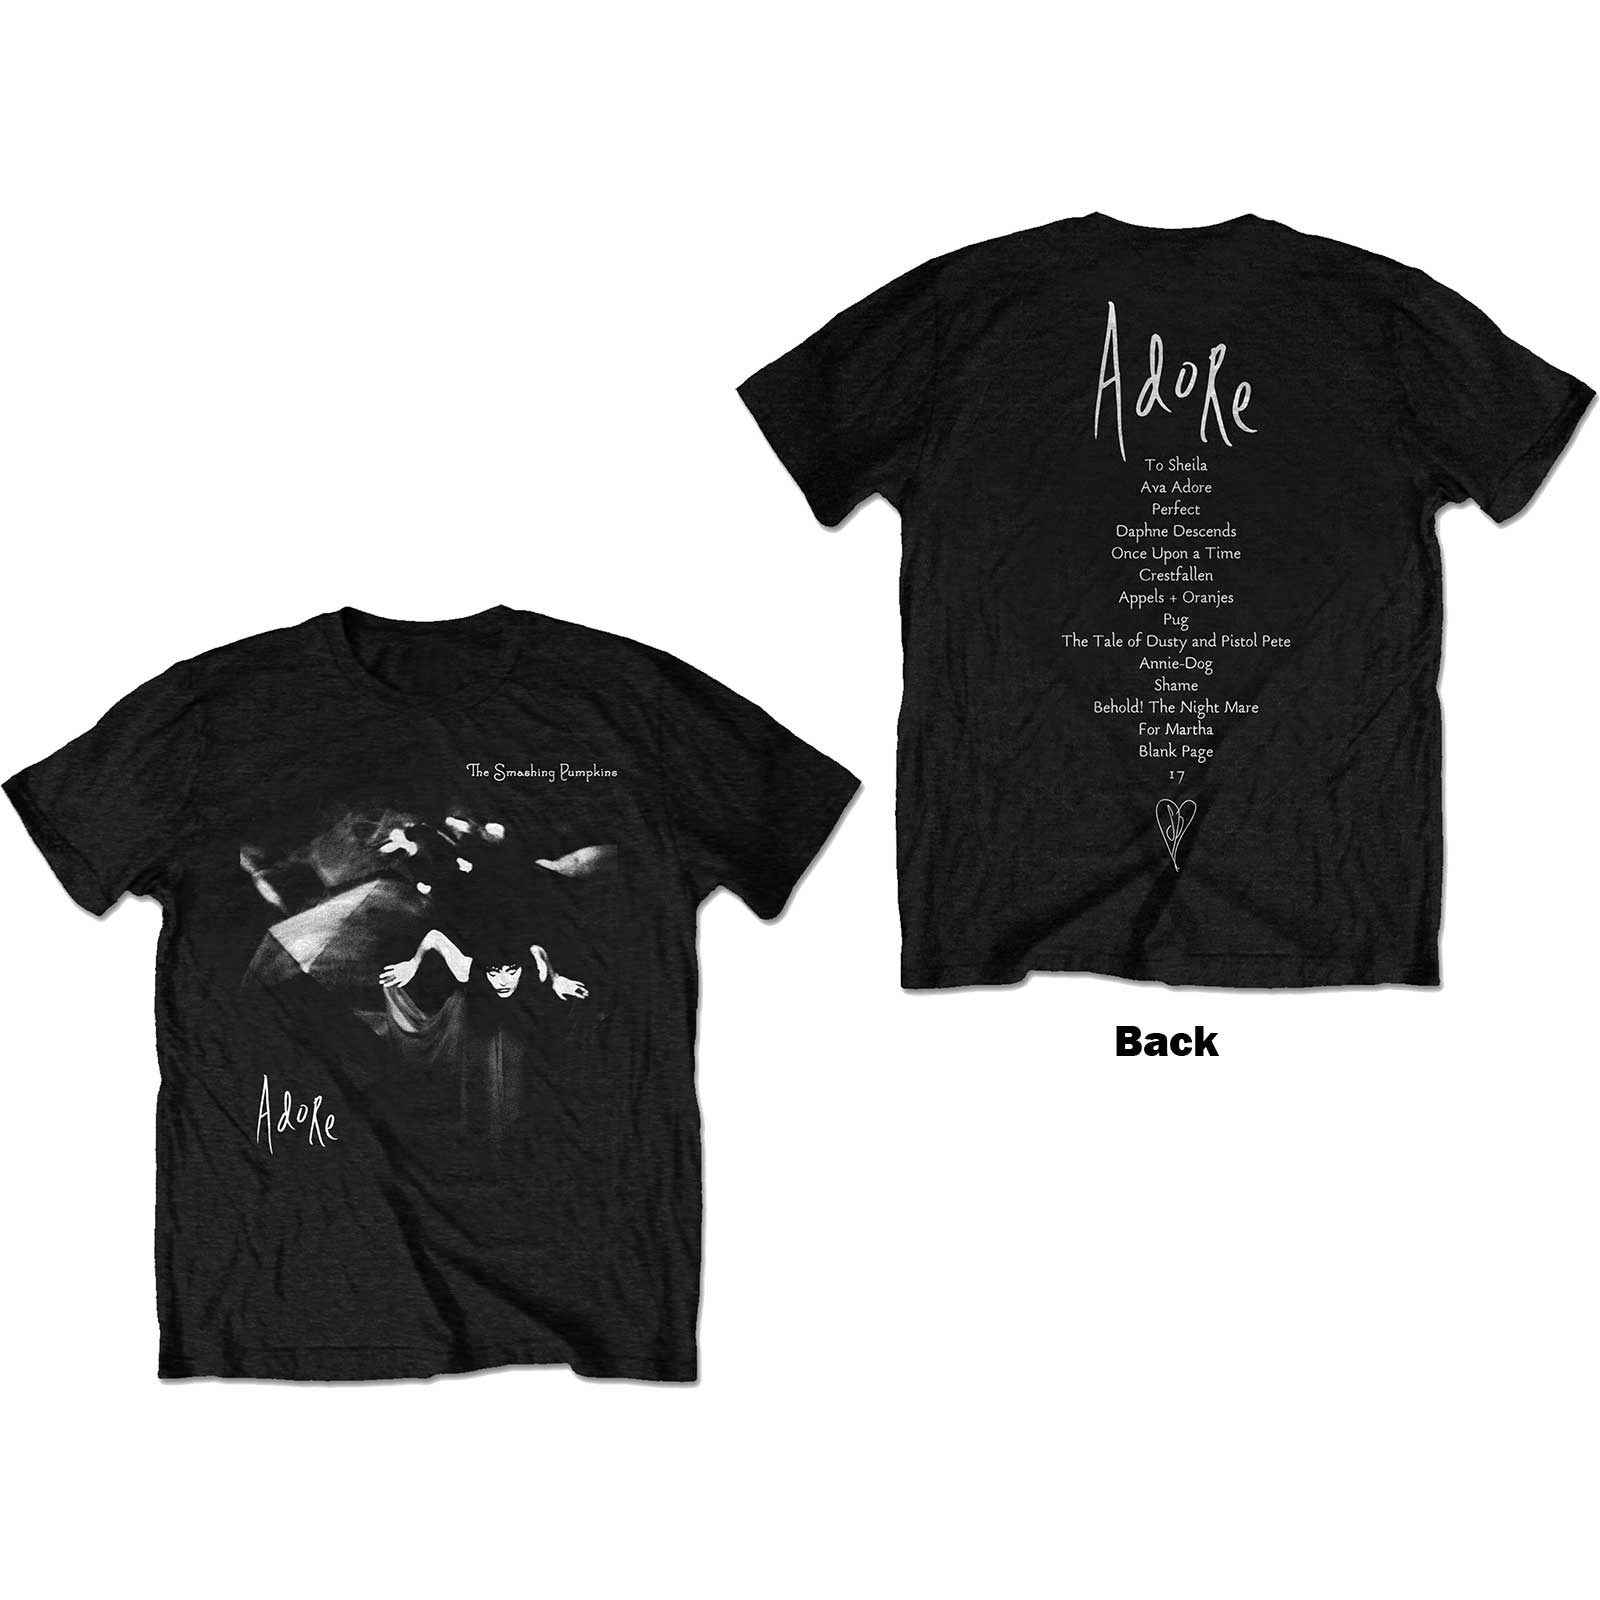 The Smashing Pumpkins T-Shirt - Adore Album Cover (Unisex) Front and Back